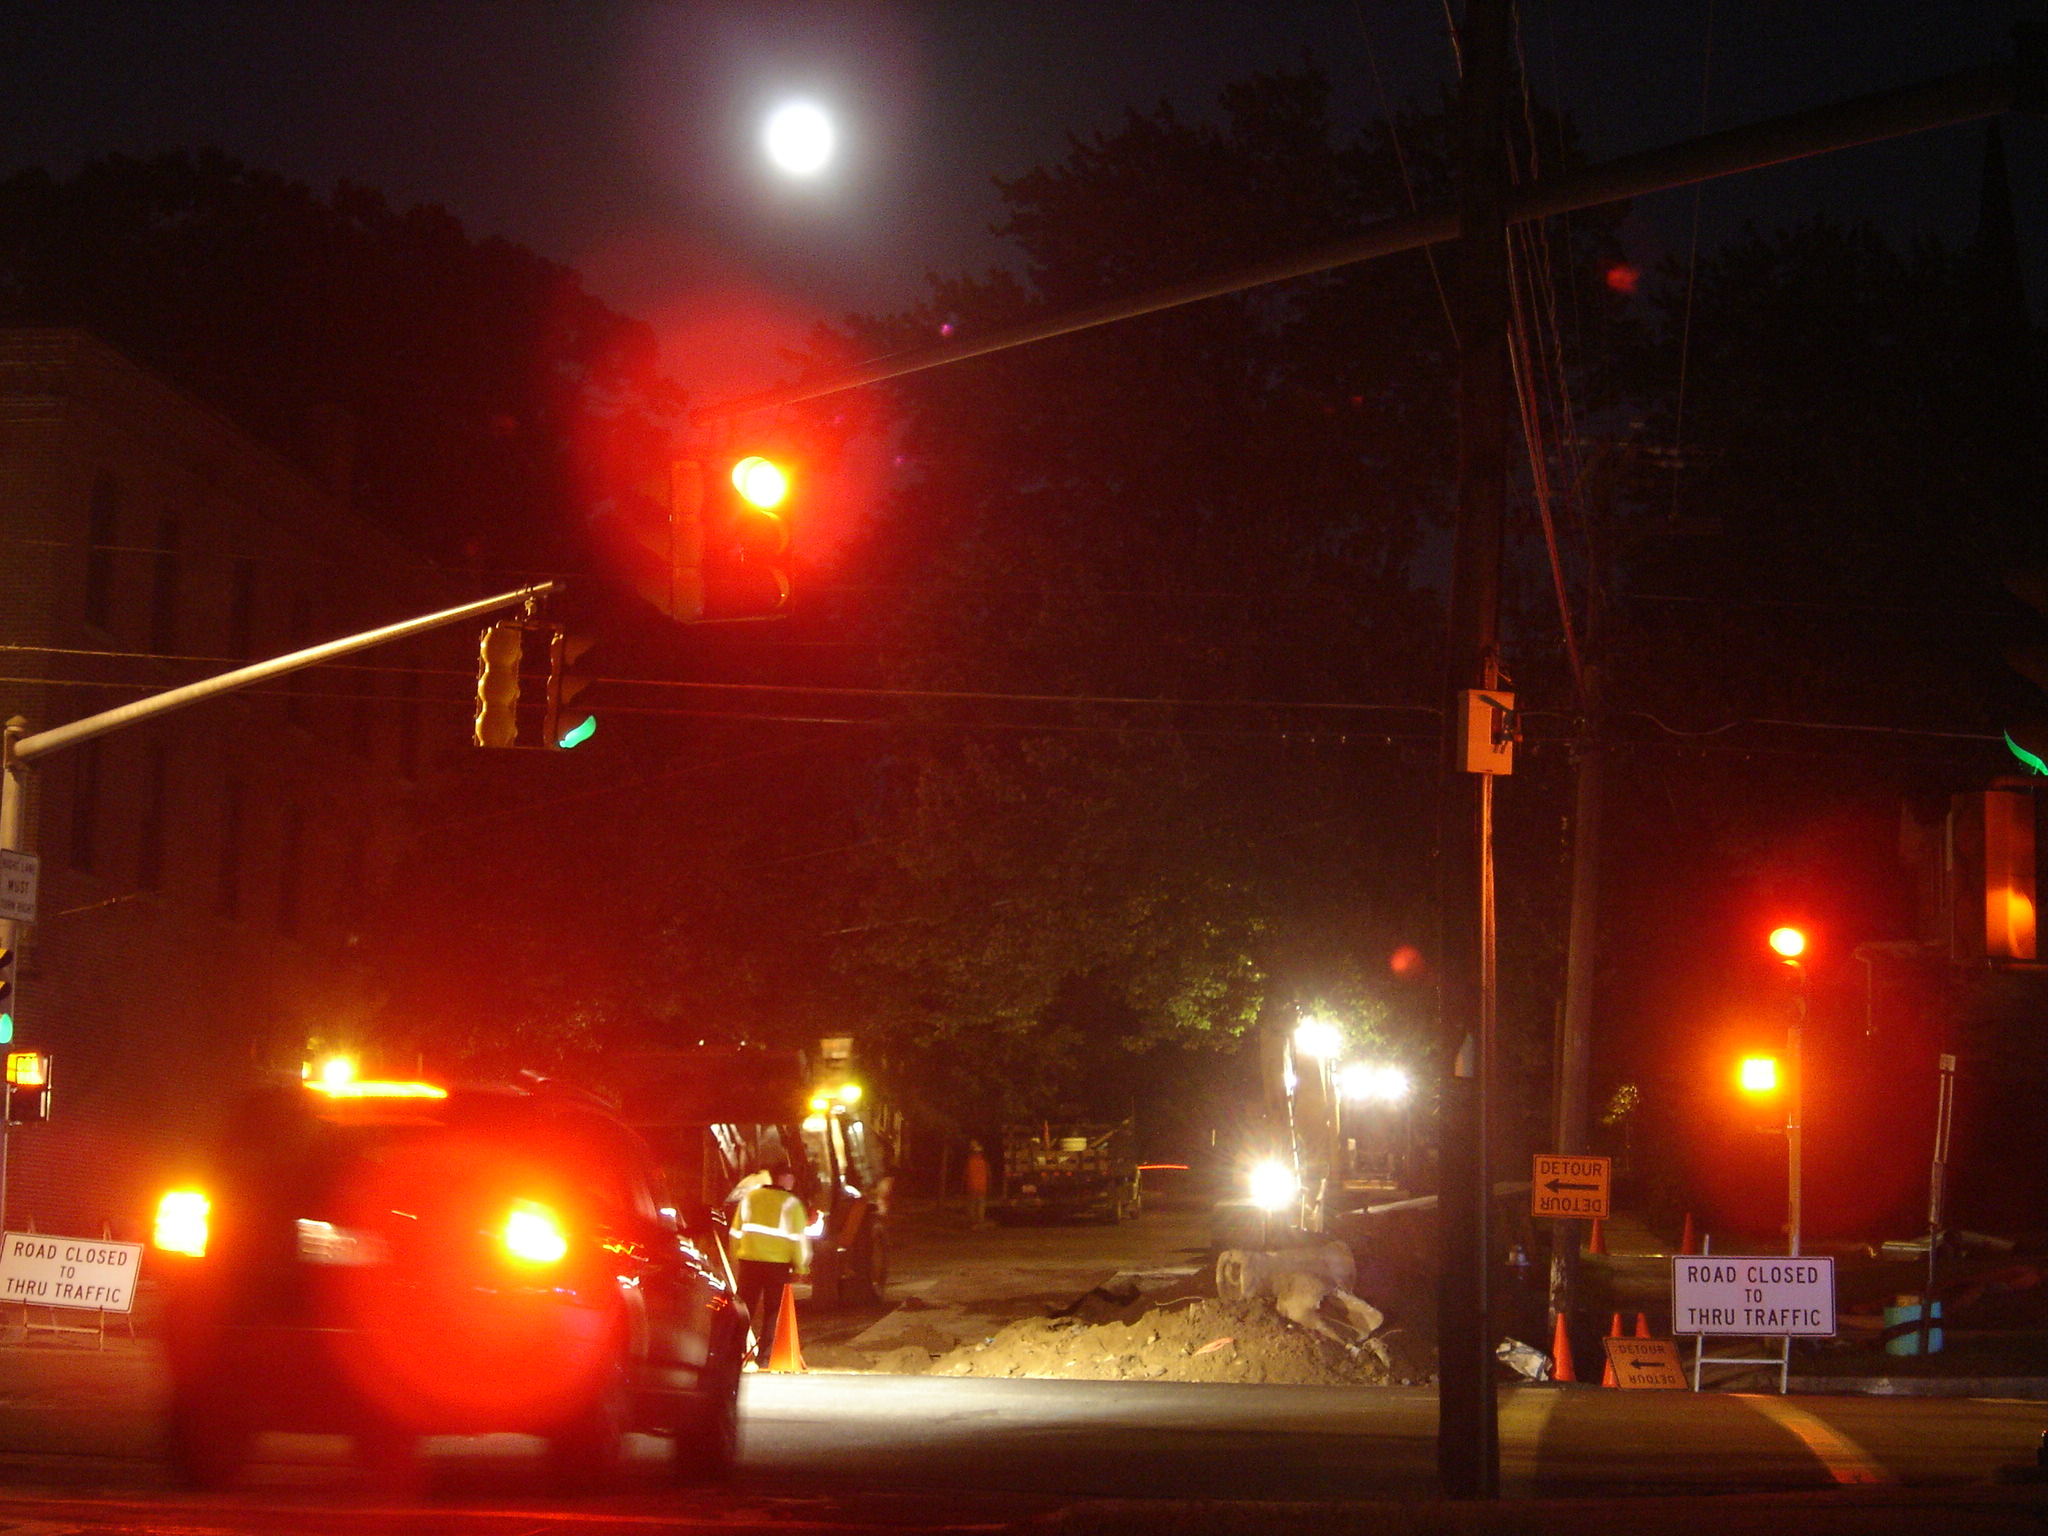 Work crews at night digging a trench on 7th Street in Turners Falls, September 2006, with full moon overhead.